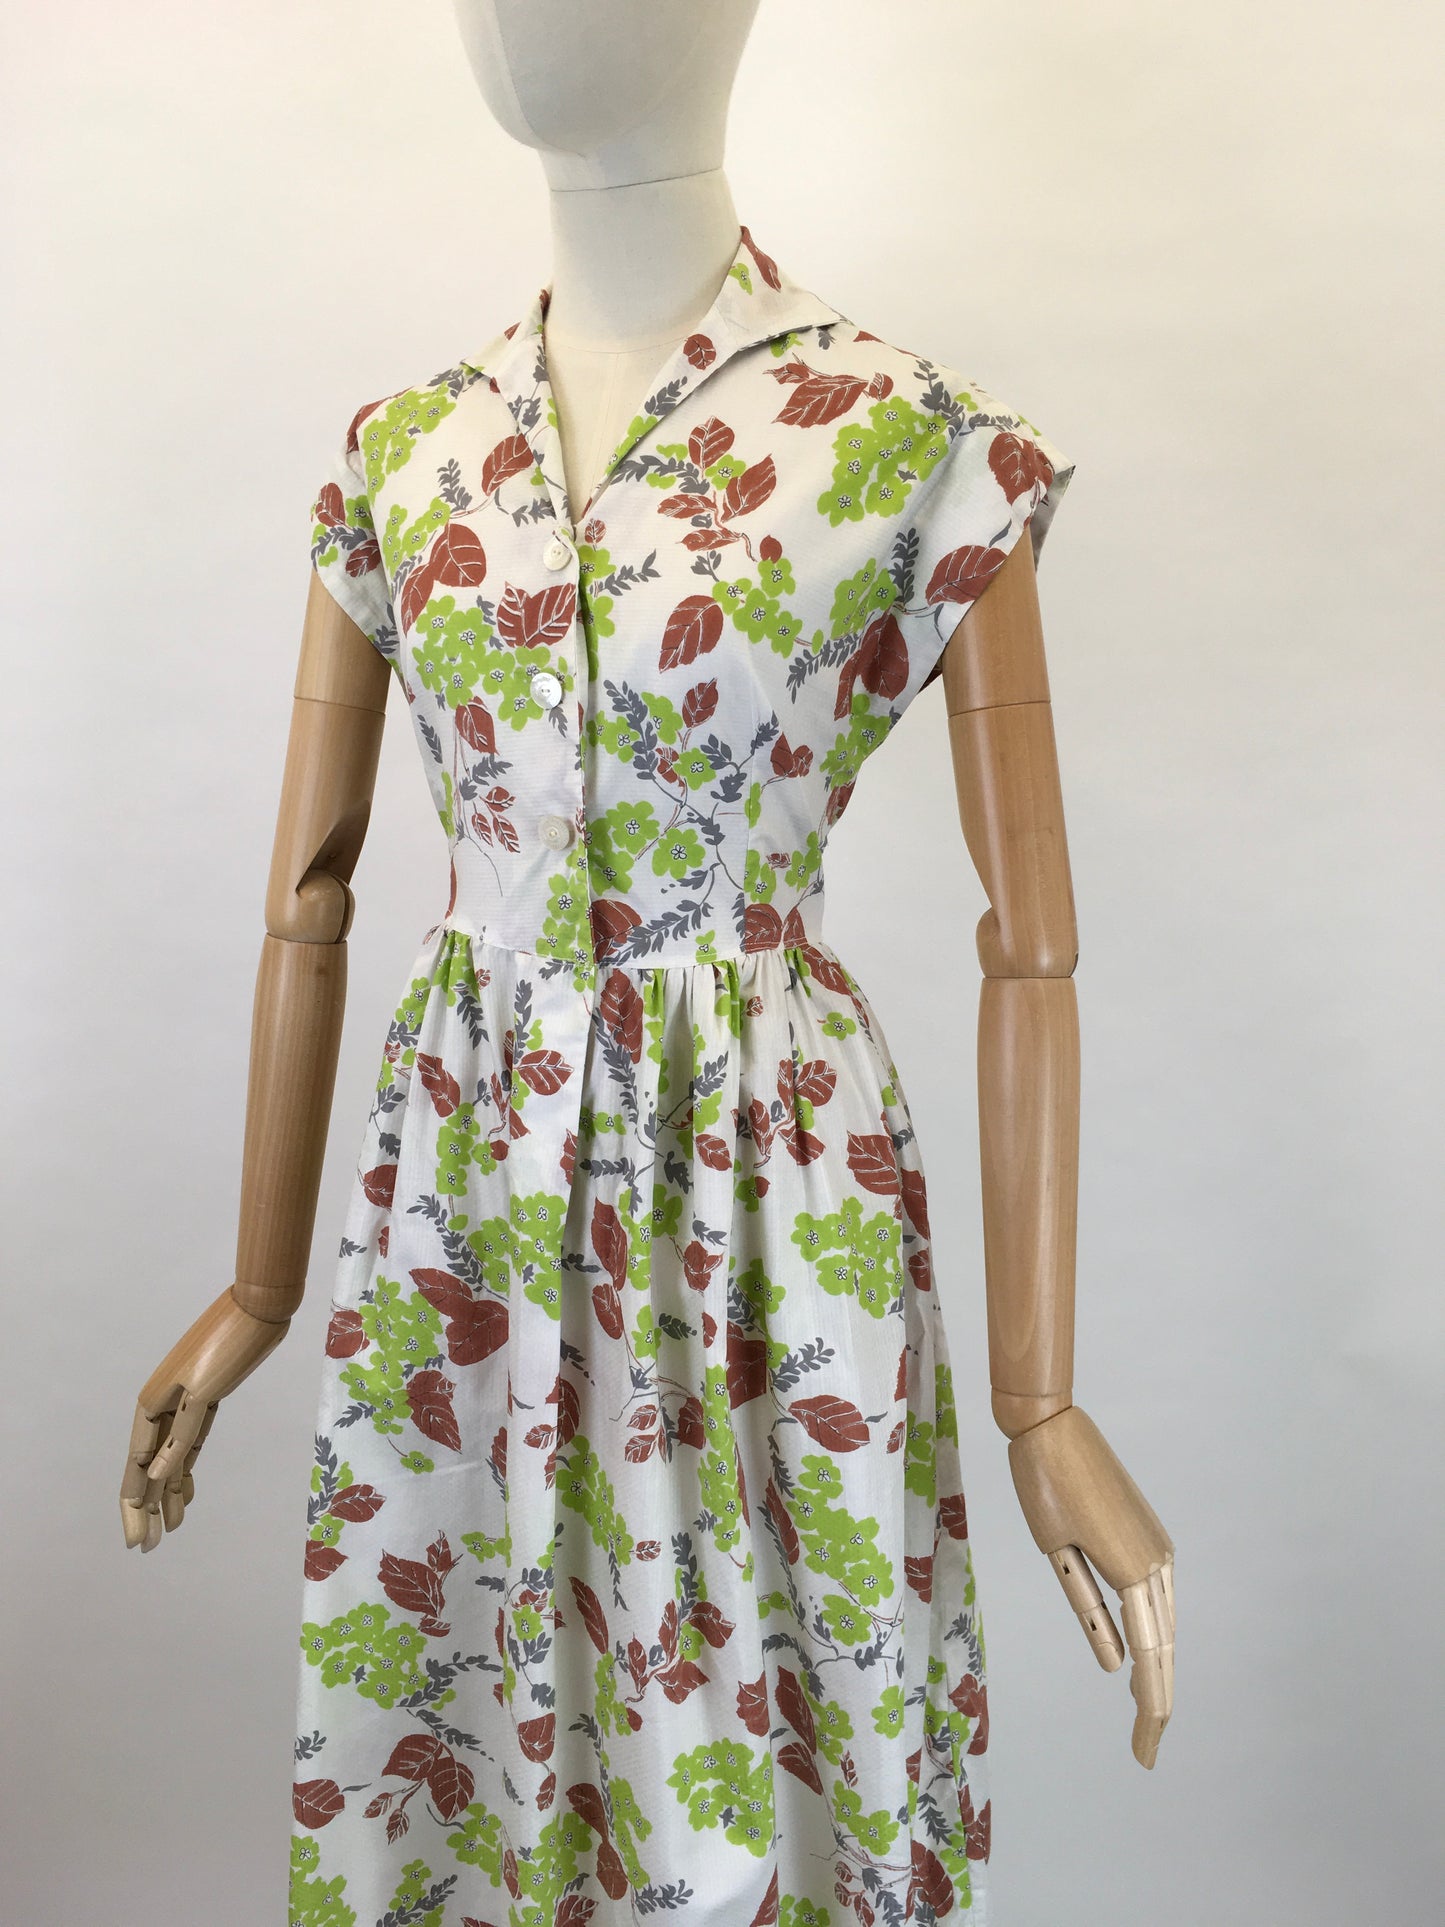 Original 1950s Crisp Cotton Day Dress - In Autumnal Shades of Warm Browns, Soft Greys and Bright Olive Green